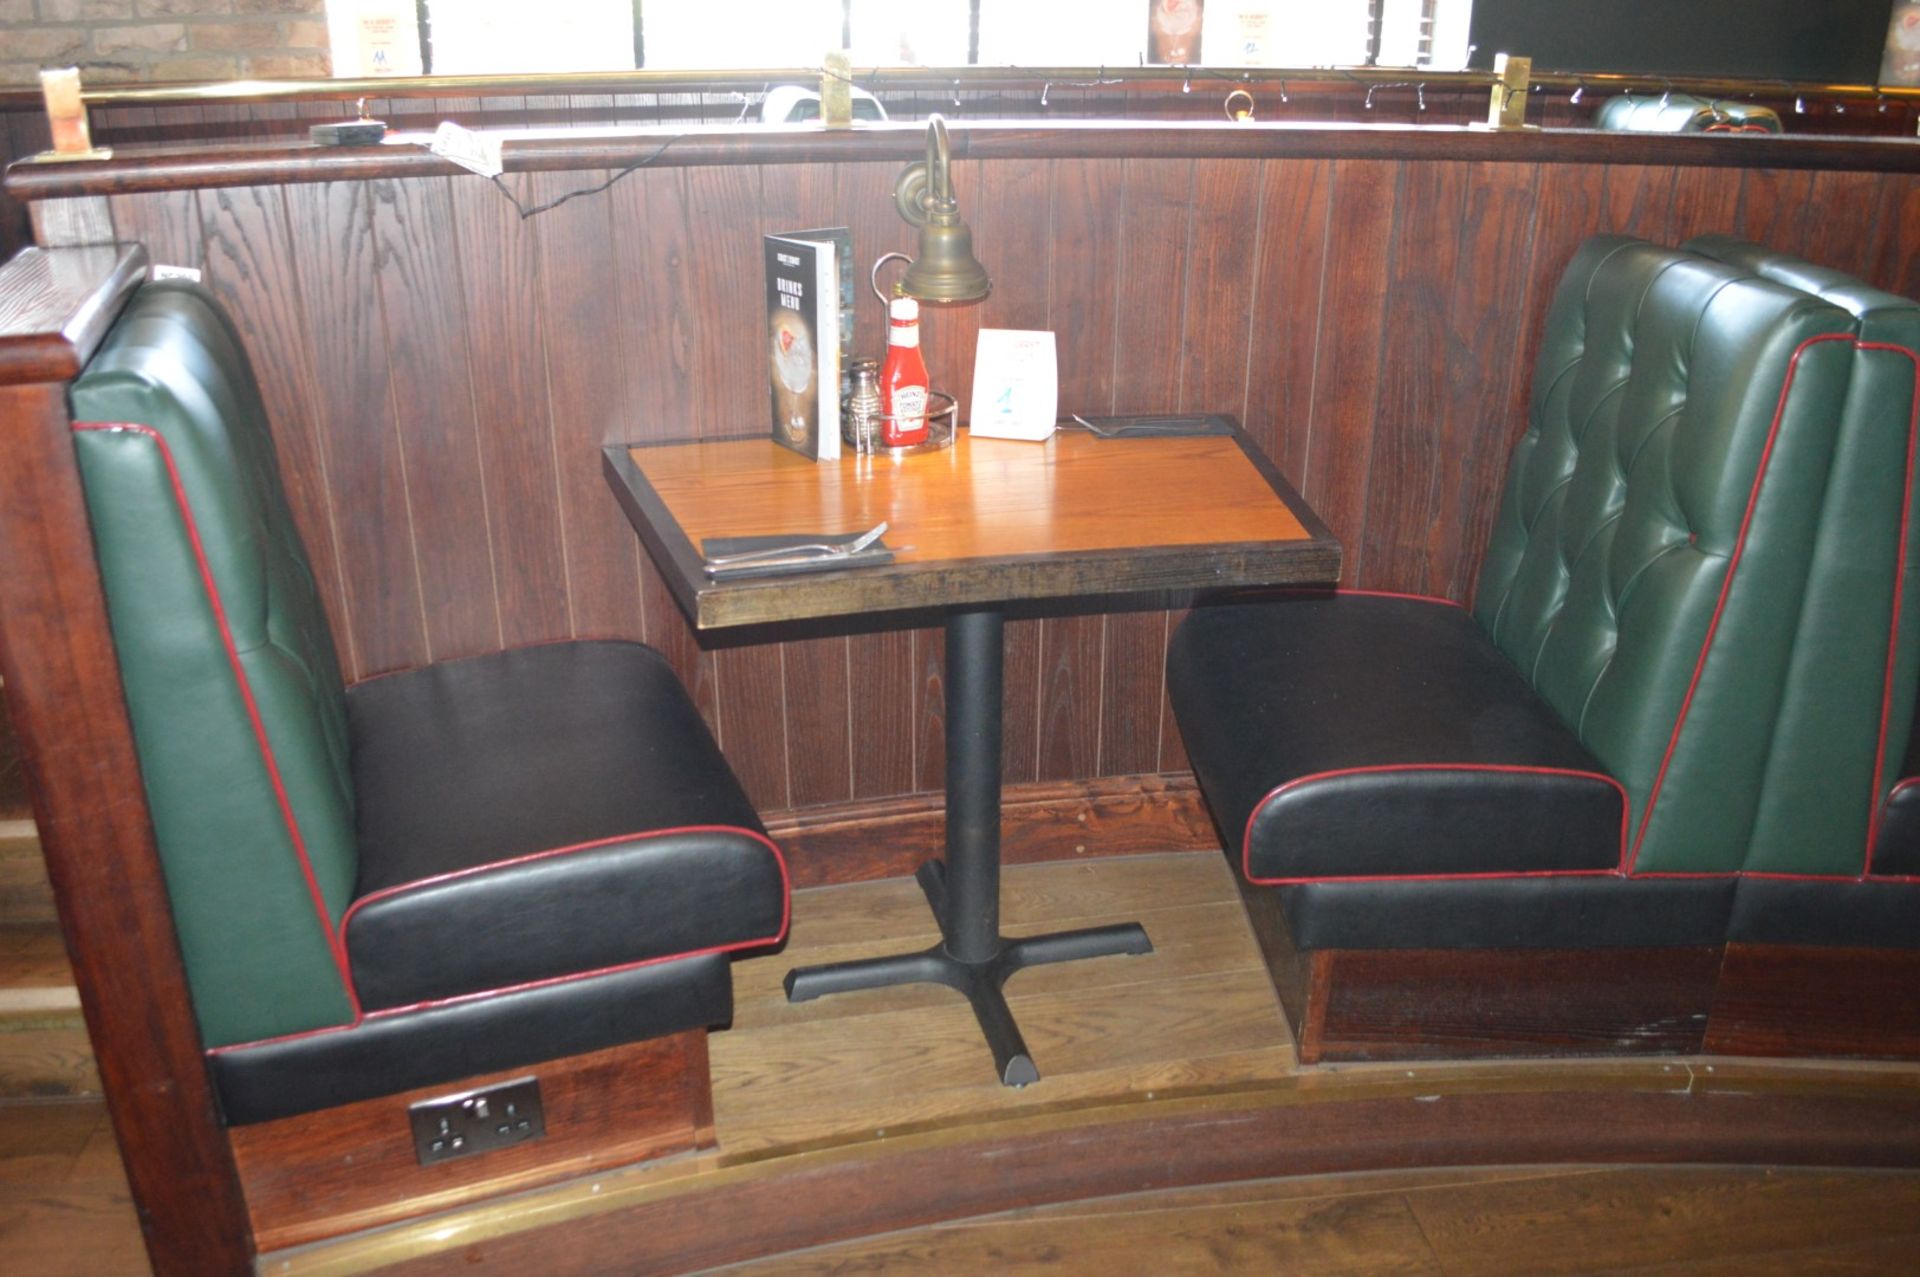 3 x Sections of Restaurant Booth Seating - Include 2 x Single Seats and 1 x Single Back to Back Seat - Image 9 of 12